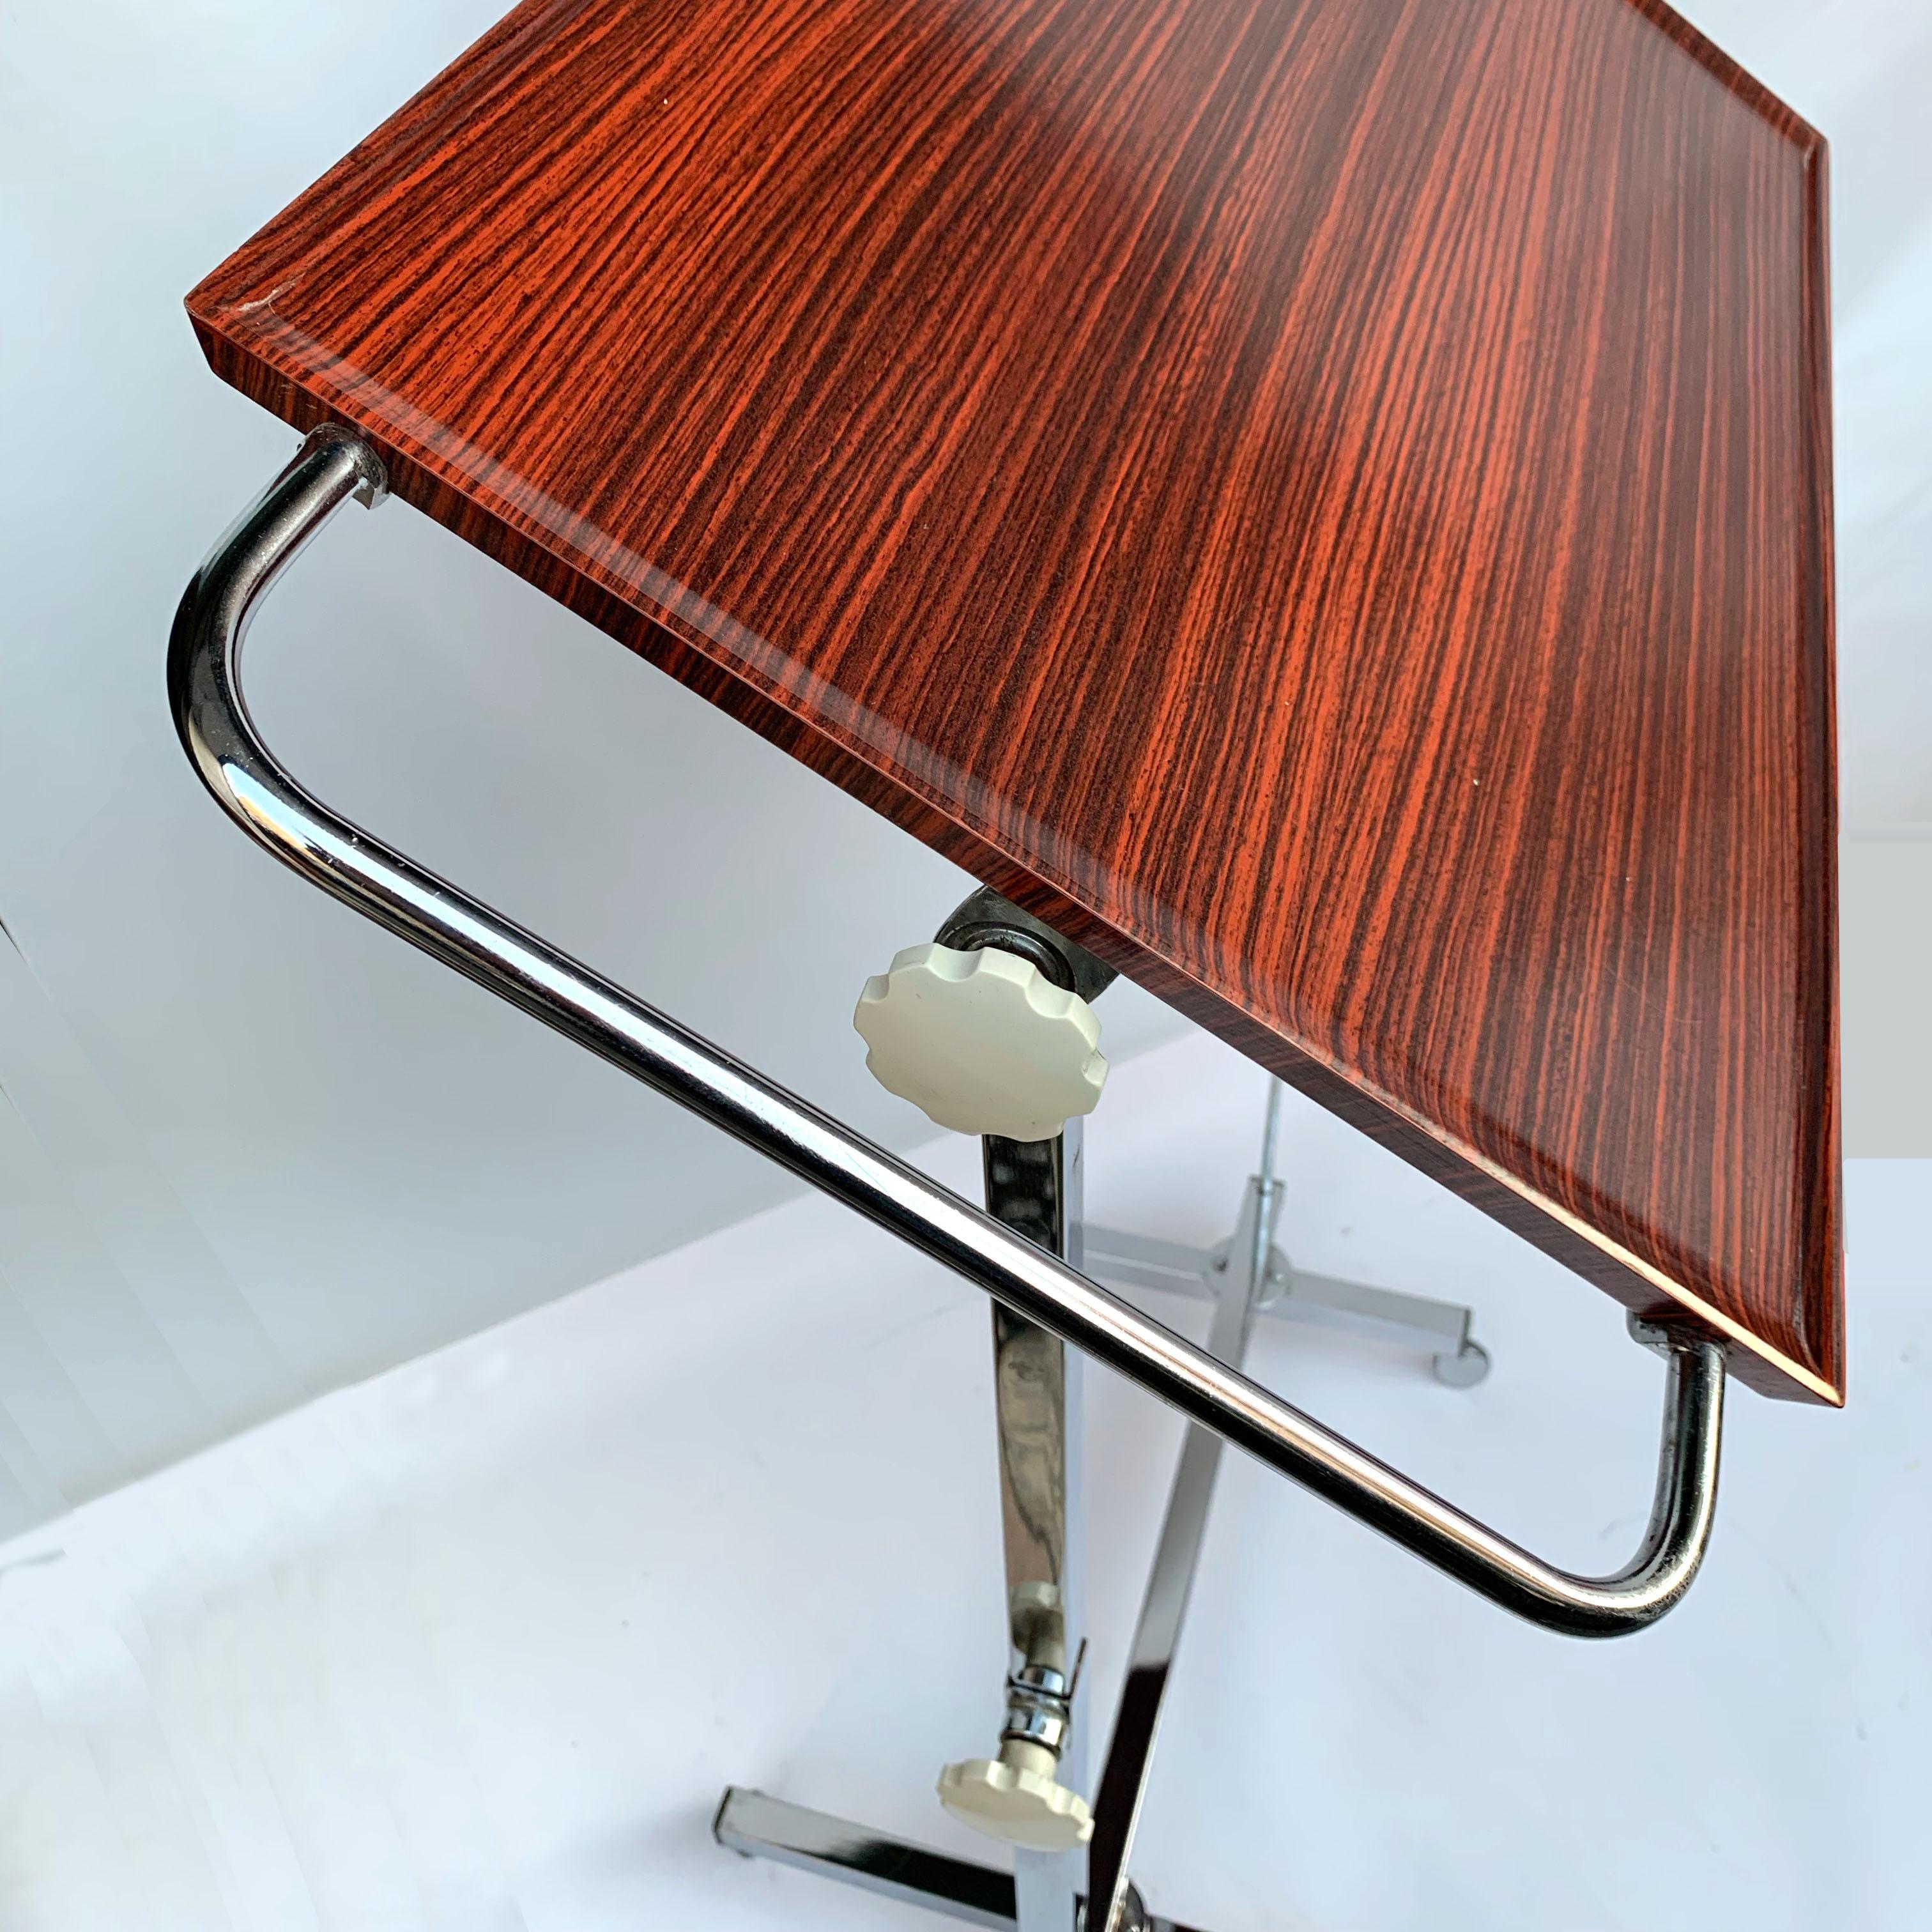 Mid-Century Modern Vintage Service Trolley by Variett Bremshey for Bremshey & Co., Germany, 1966 For Sale